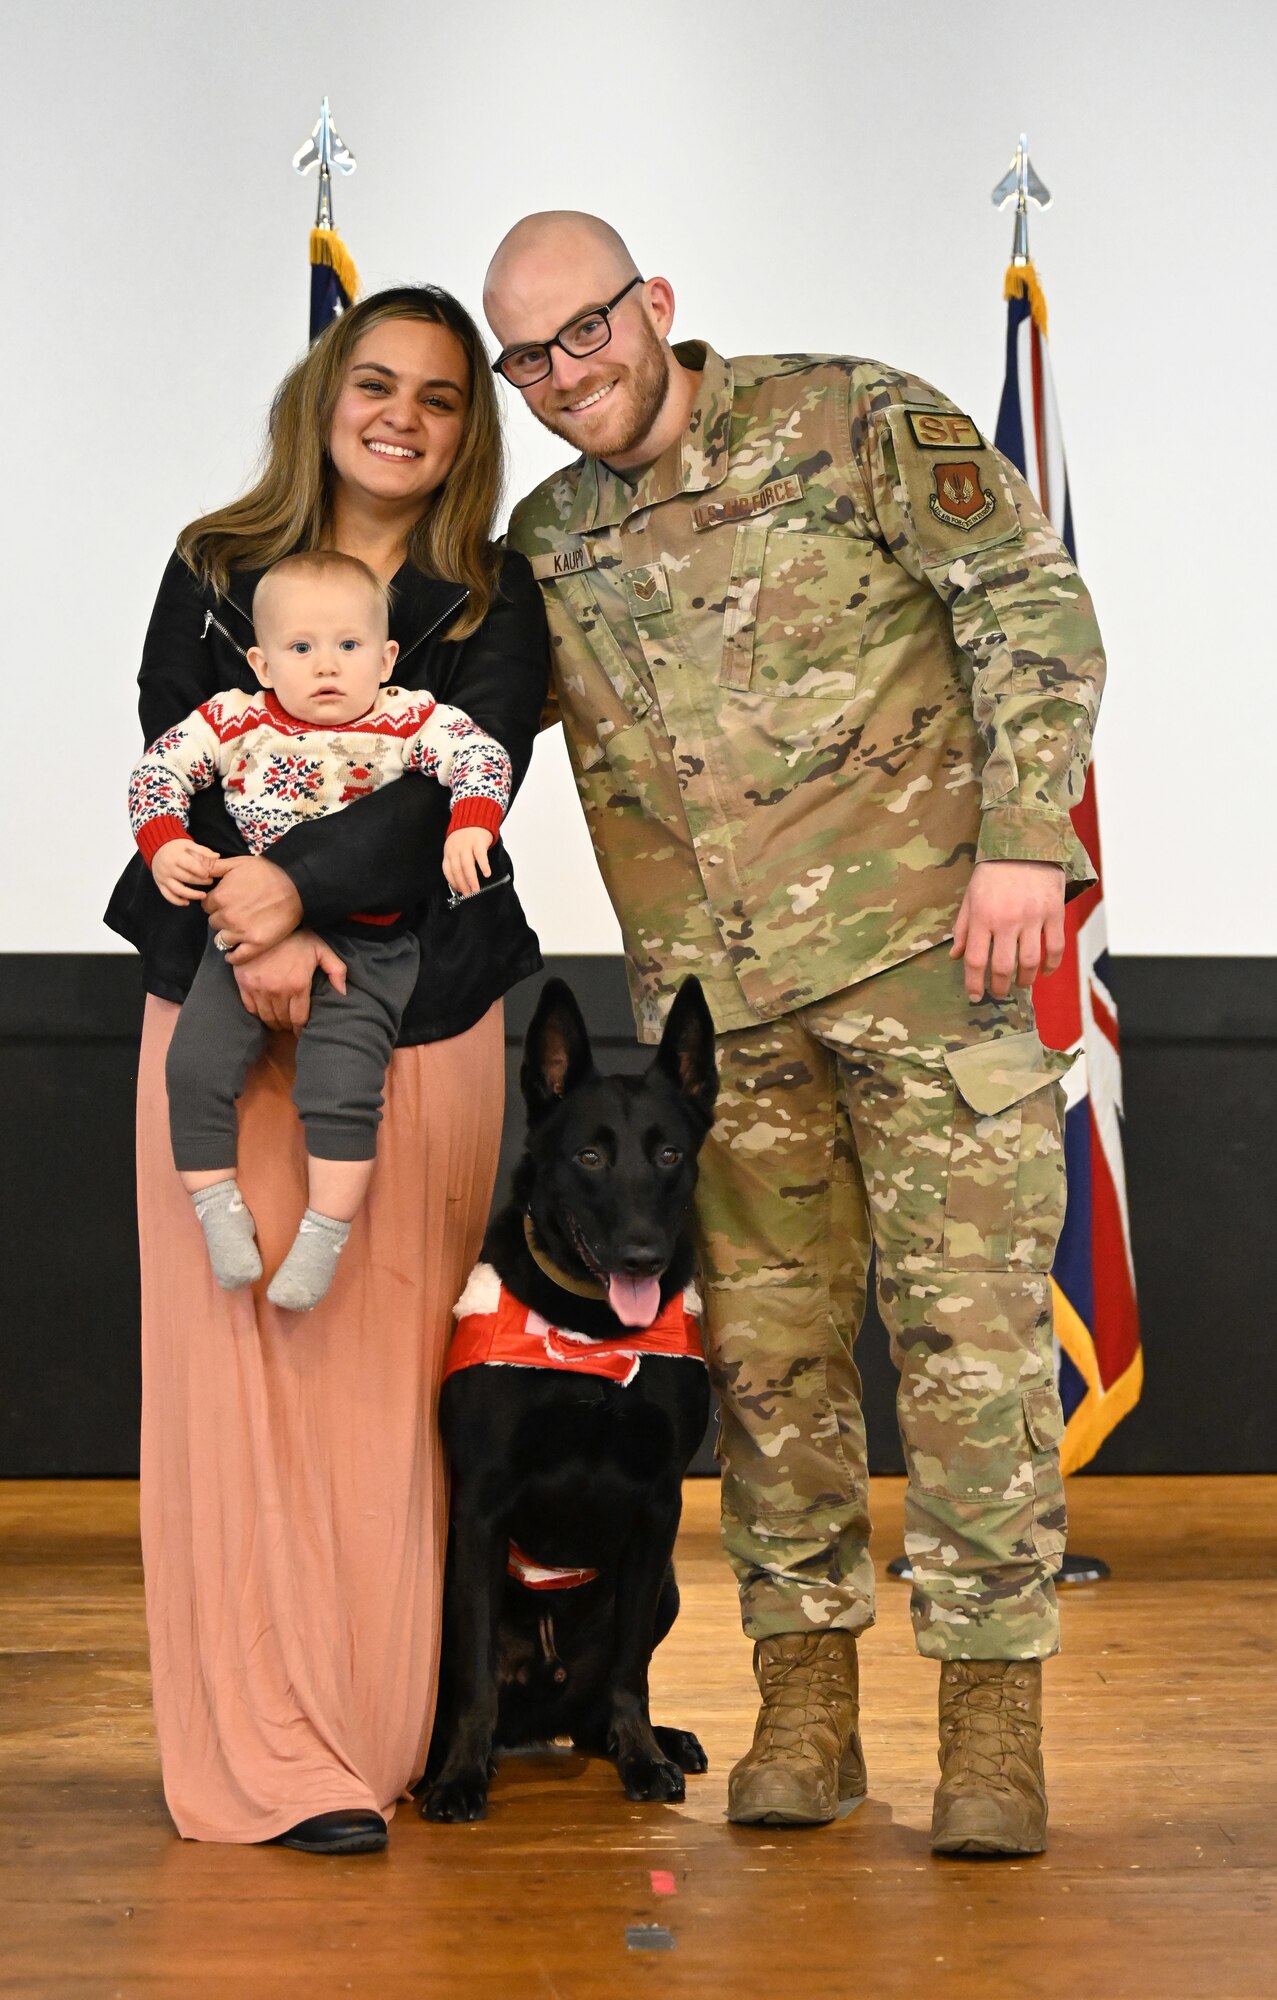 U.S. Air Force Staff Sgt. Ben Kaupp, right, and his wife and son get their first family photo taken with newly retired Military Working Dog Cchuy, who they have adopted, at the end of the K9’s official retirement ceremony at Royal Air Force Lakenheath, England, Dec. 10, 2023. Cchuy amassed more than 5,900 in all-weather specialized explosive search, deterrence and intruder detection operations, to provide a safe and secure environment for the mission accomplishment of the 48th Fighter Wing. Kaupp was Cchuy’s final handler and formed a special bond with the Belgian Malinois, and as soon as he knew the MWD was retiring, he and his wife knew they wanted Cchuy to become part of their family. (U.S. Air Force photo by Karen Abeyasekere)